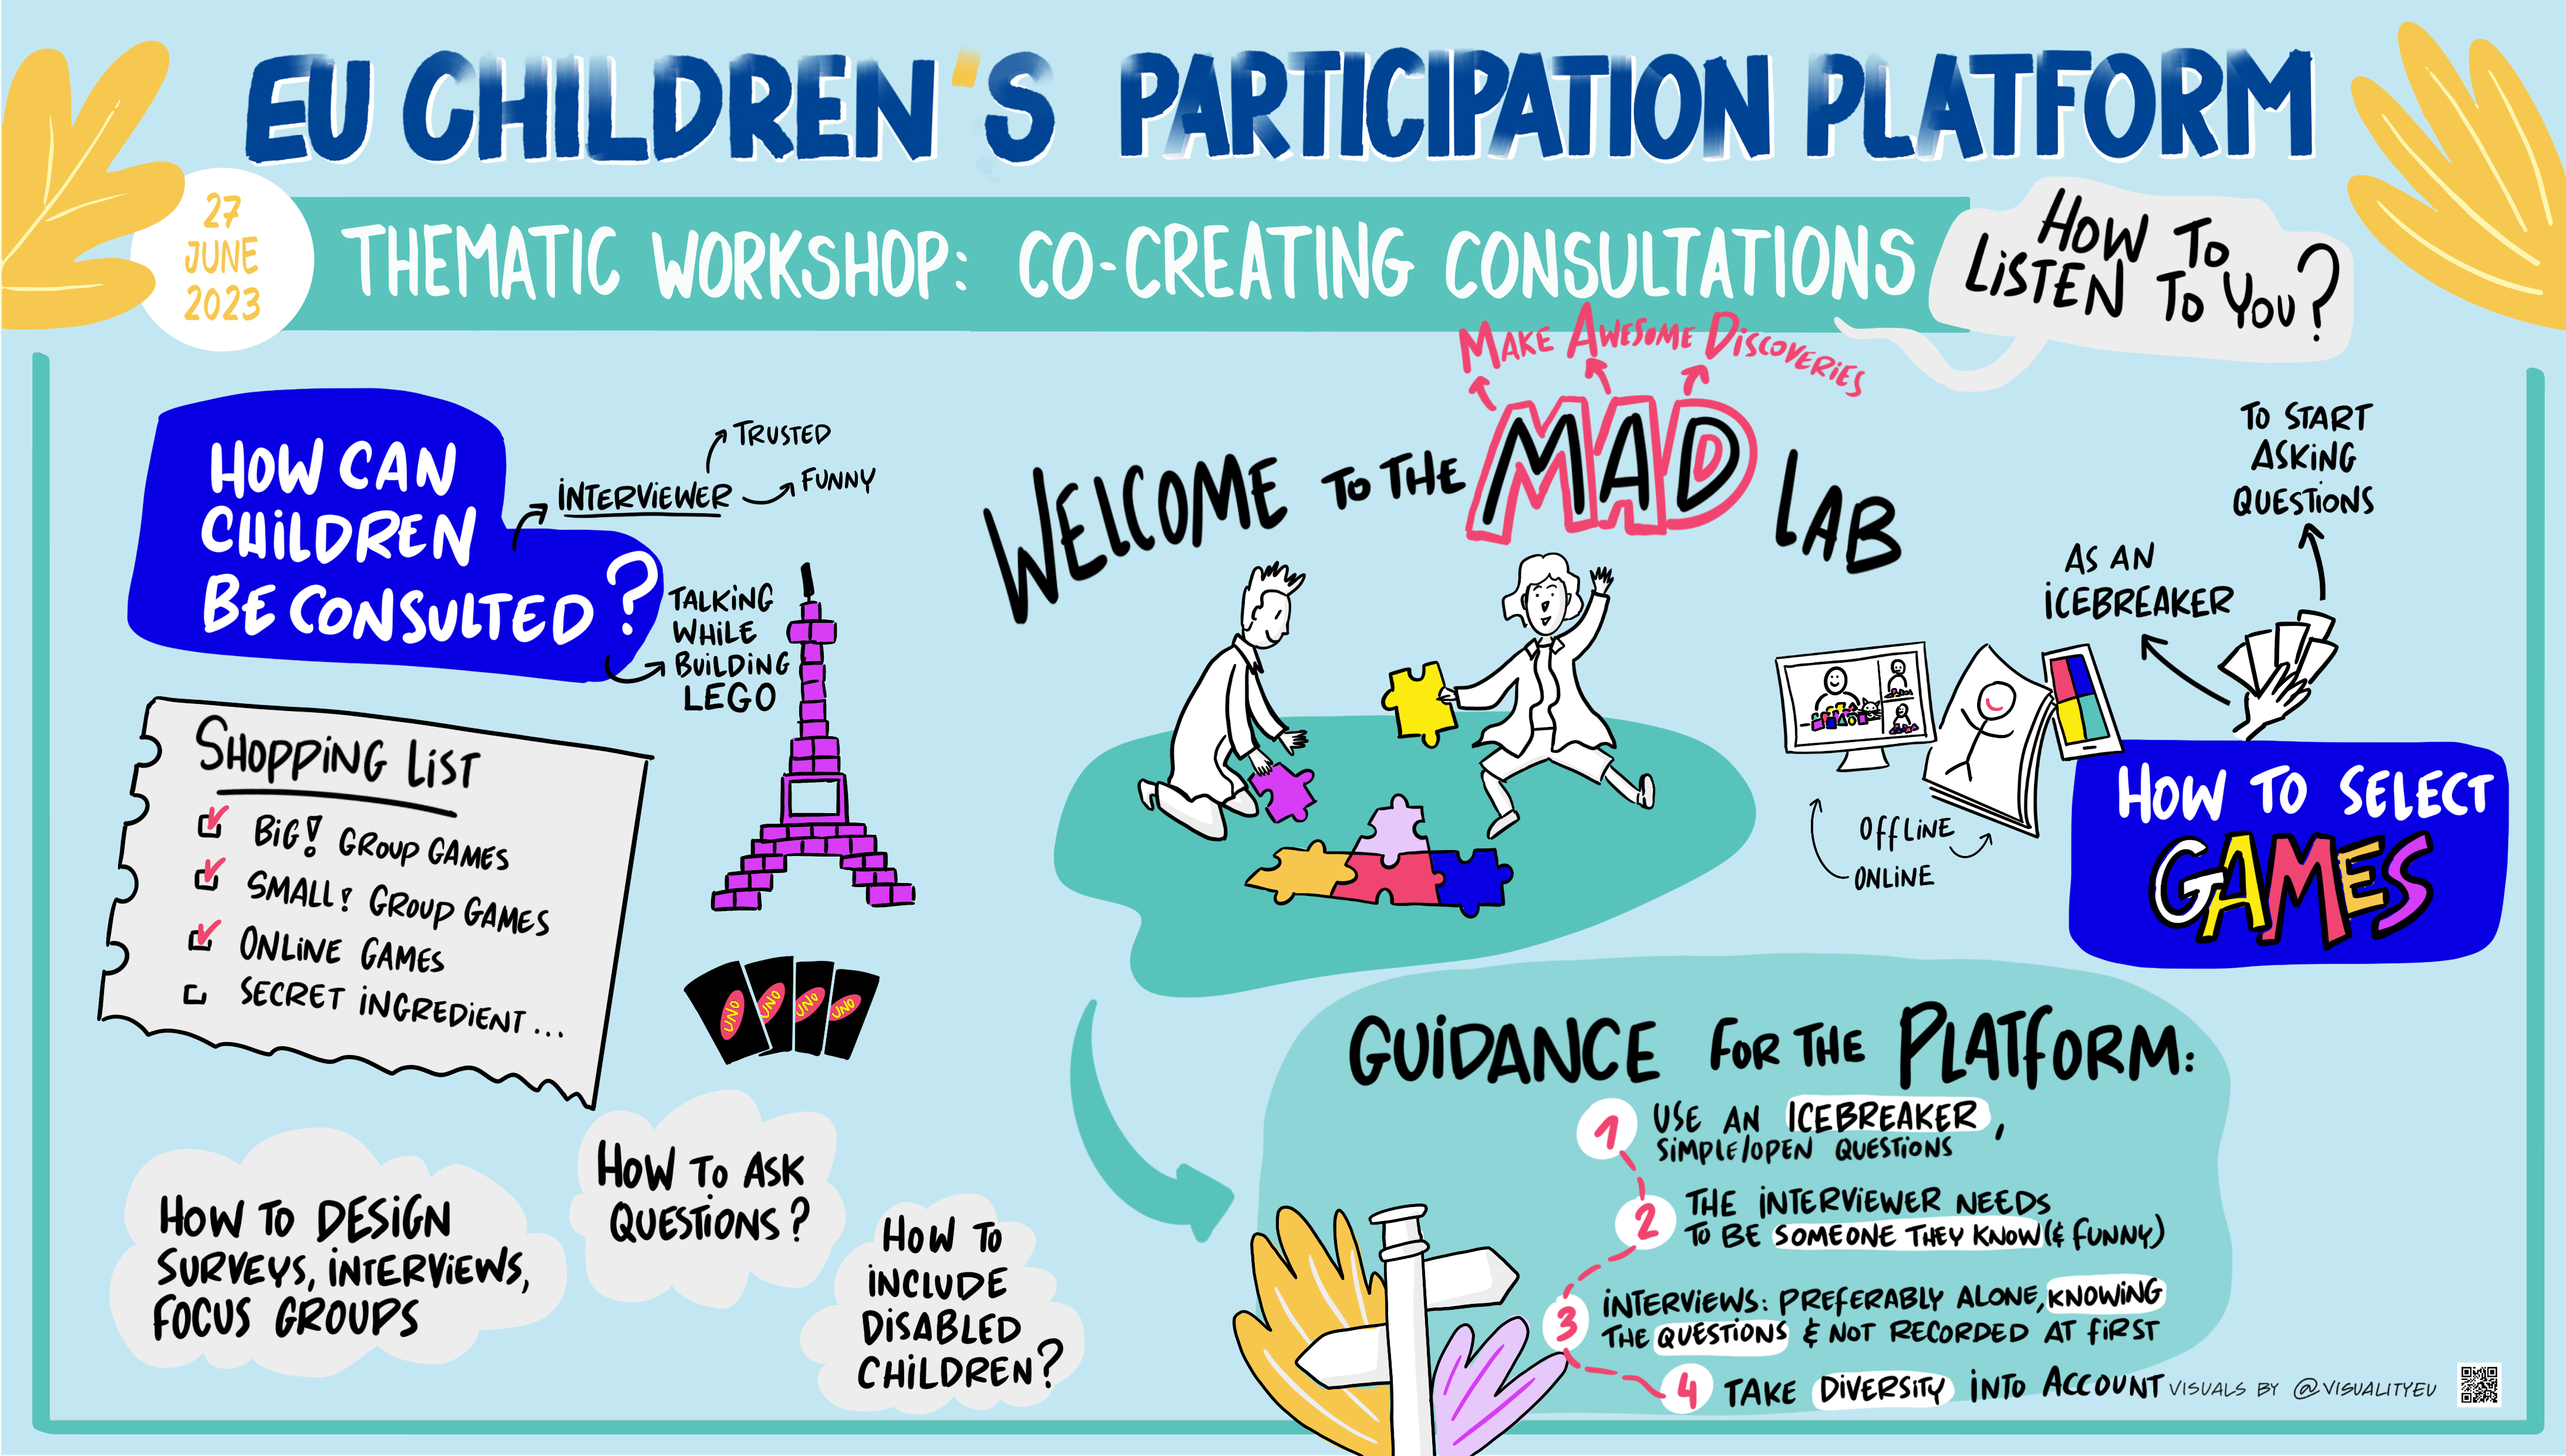 Suggestions from children on how adults could better interact with children during consultations.   